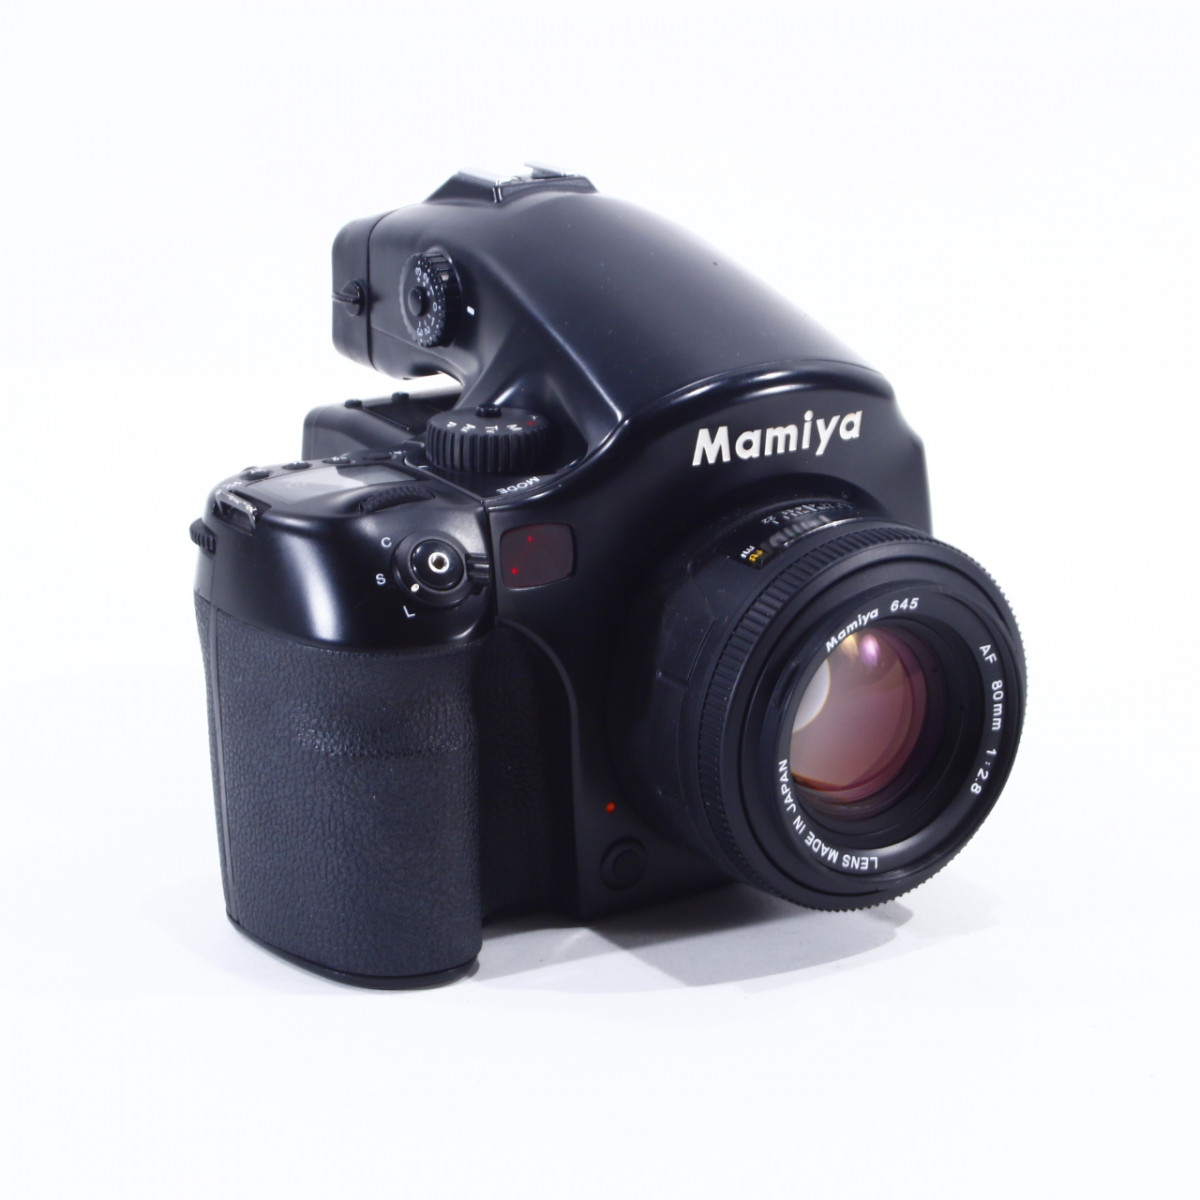 This Mamiya 645 AF Kit is a Great Way to Get into Medium Format